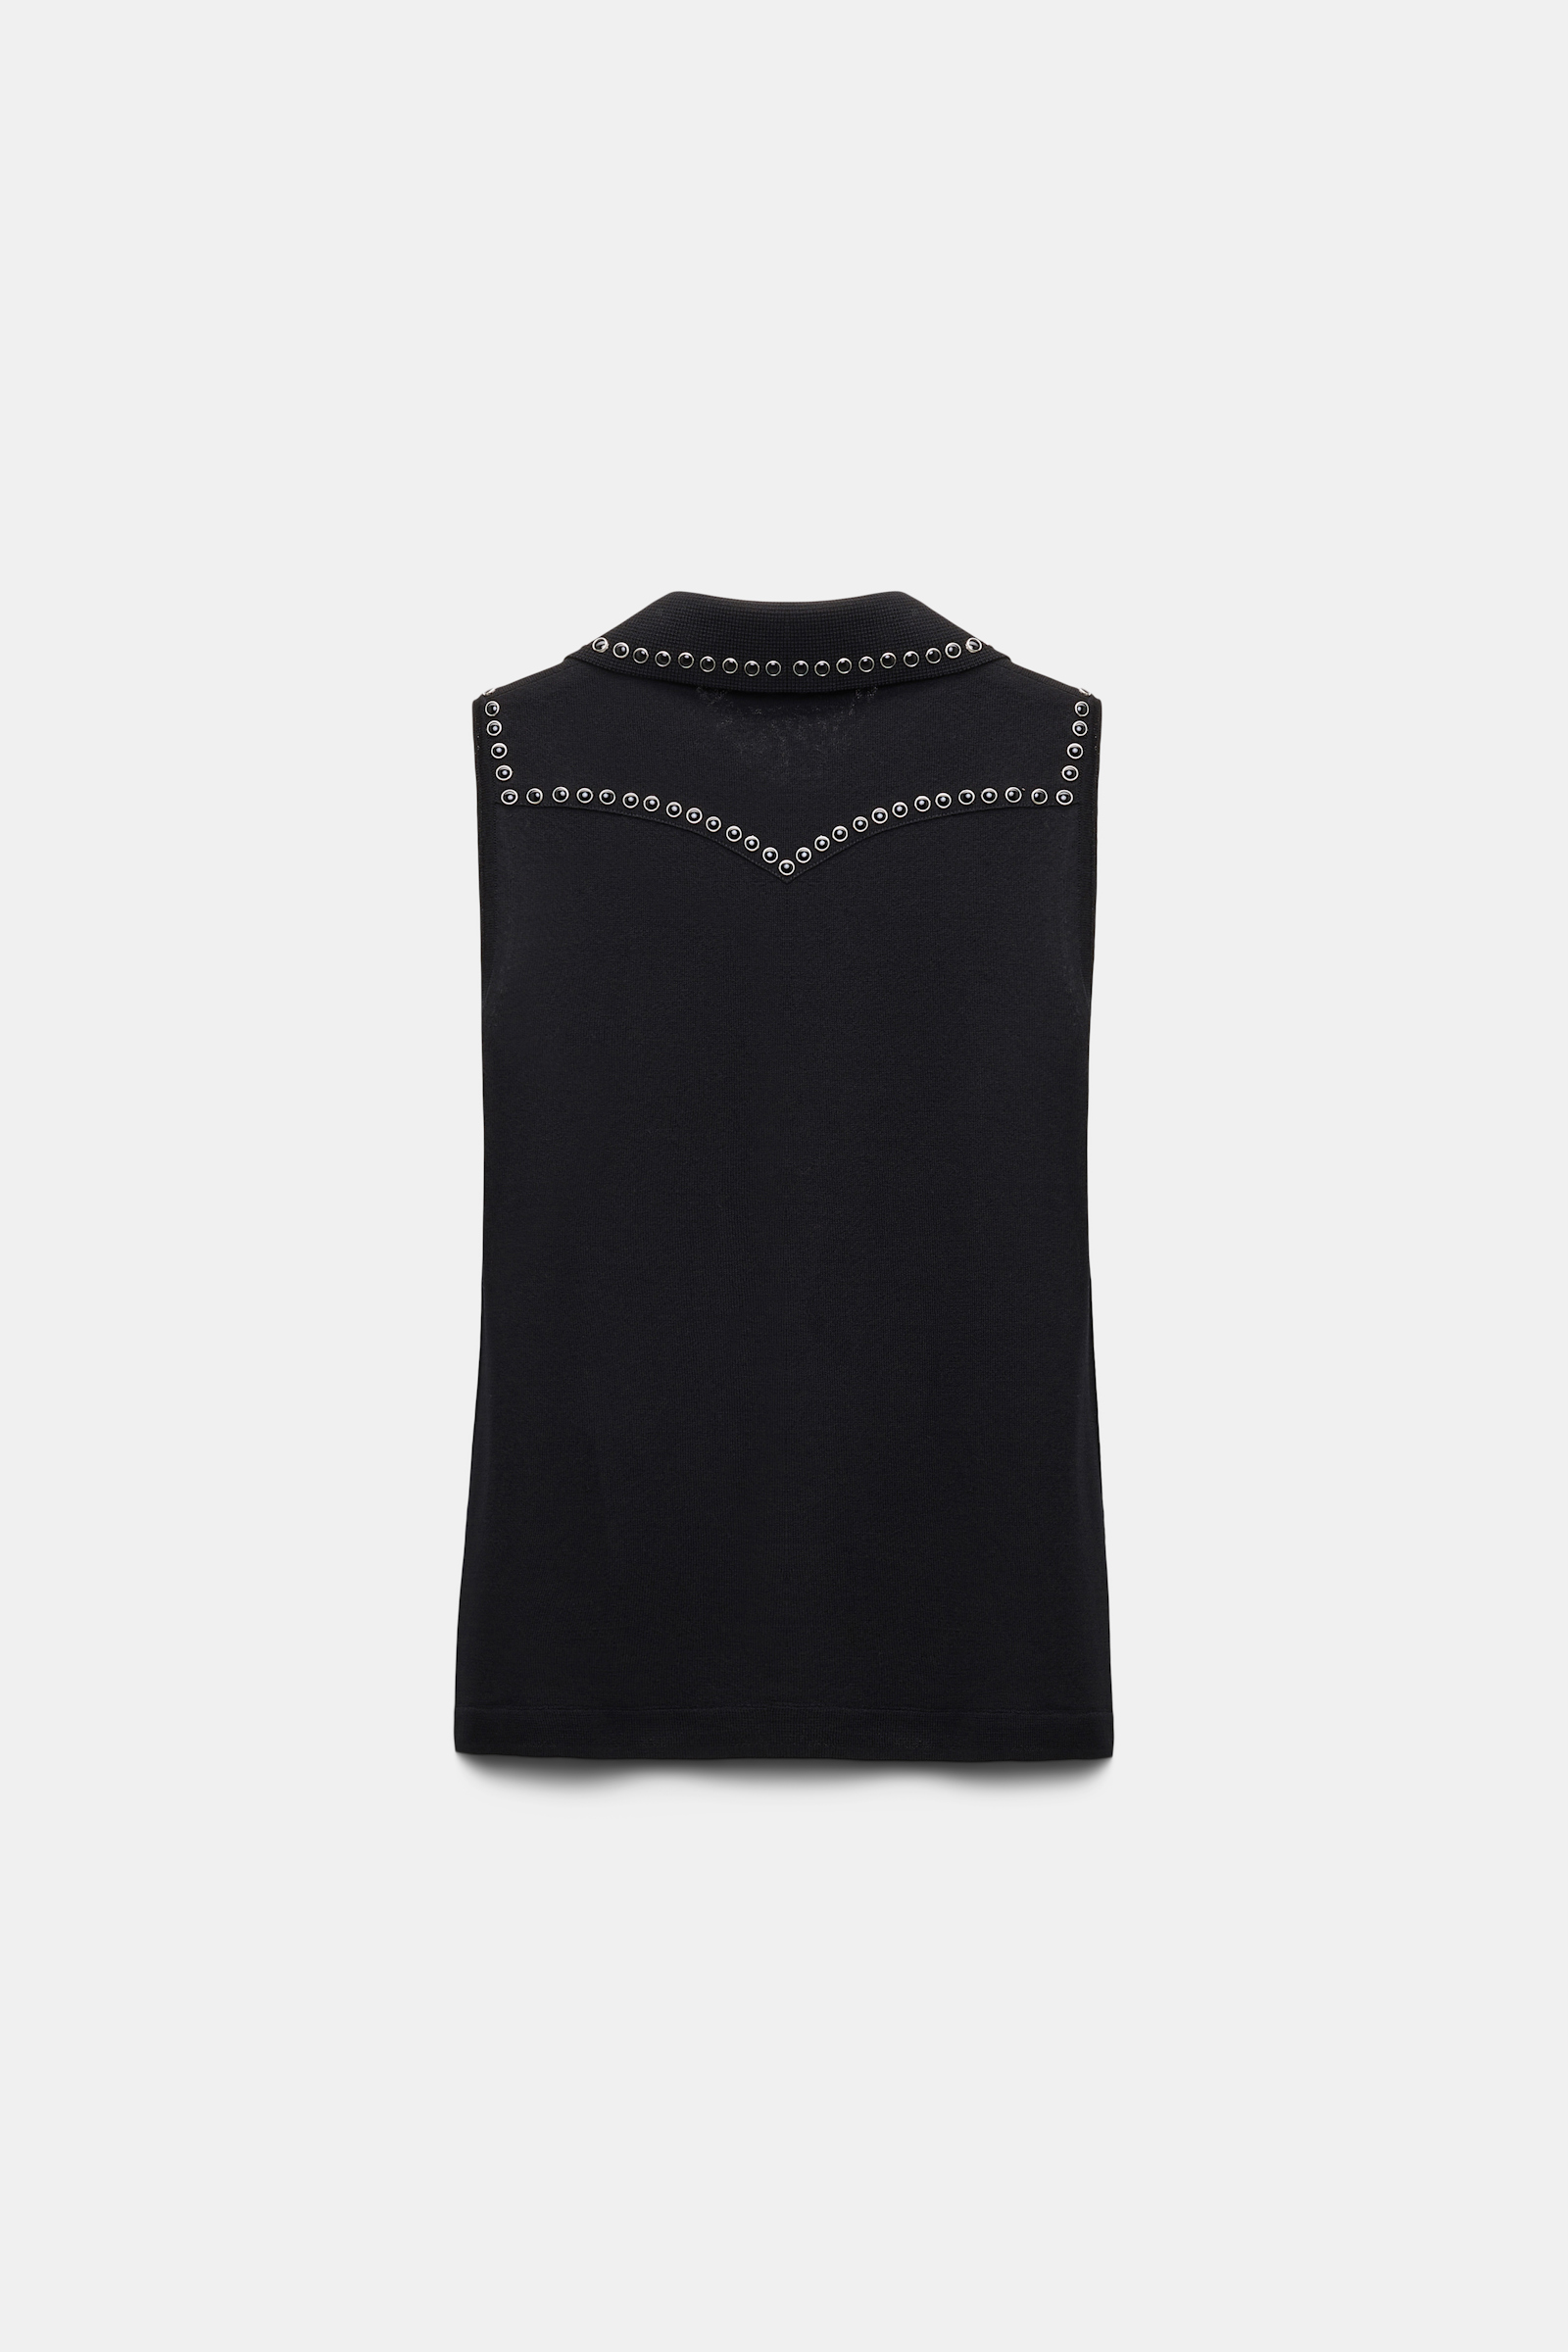 Dorothee Schumacher Embellished sleeveless knit shirt with polo collar pure black